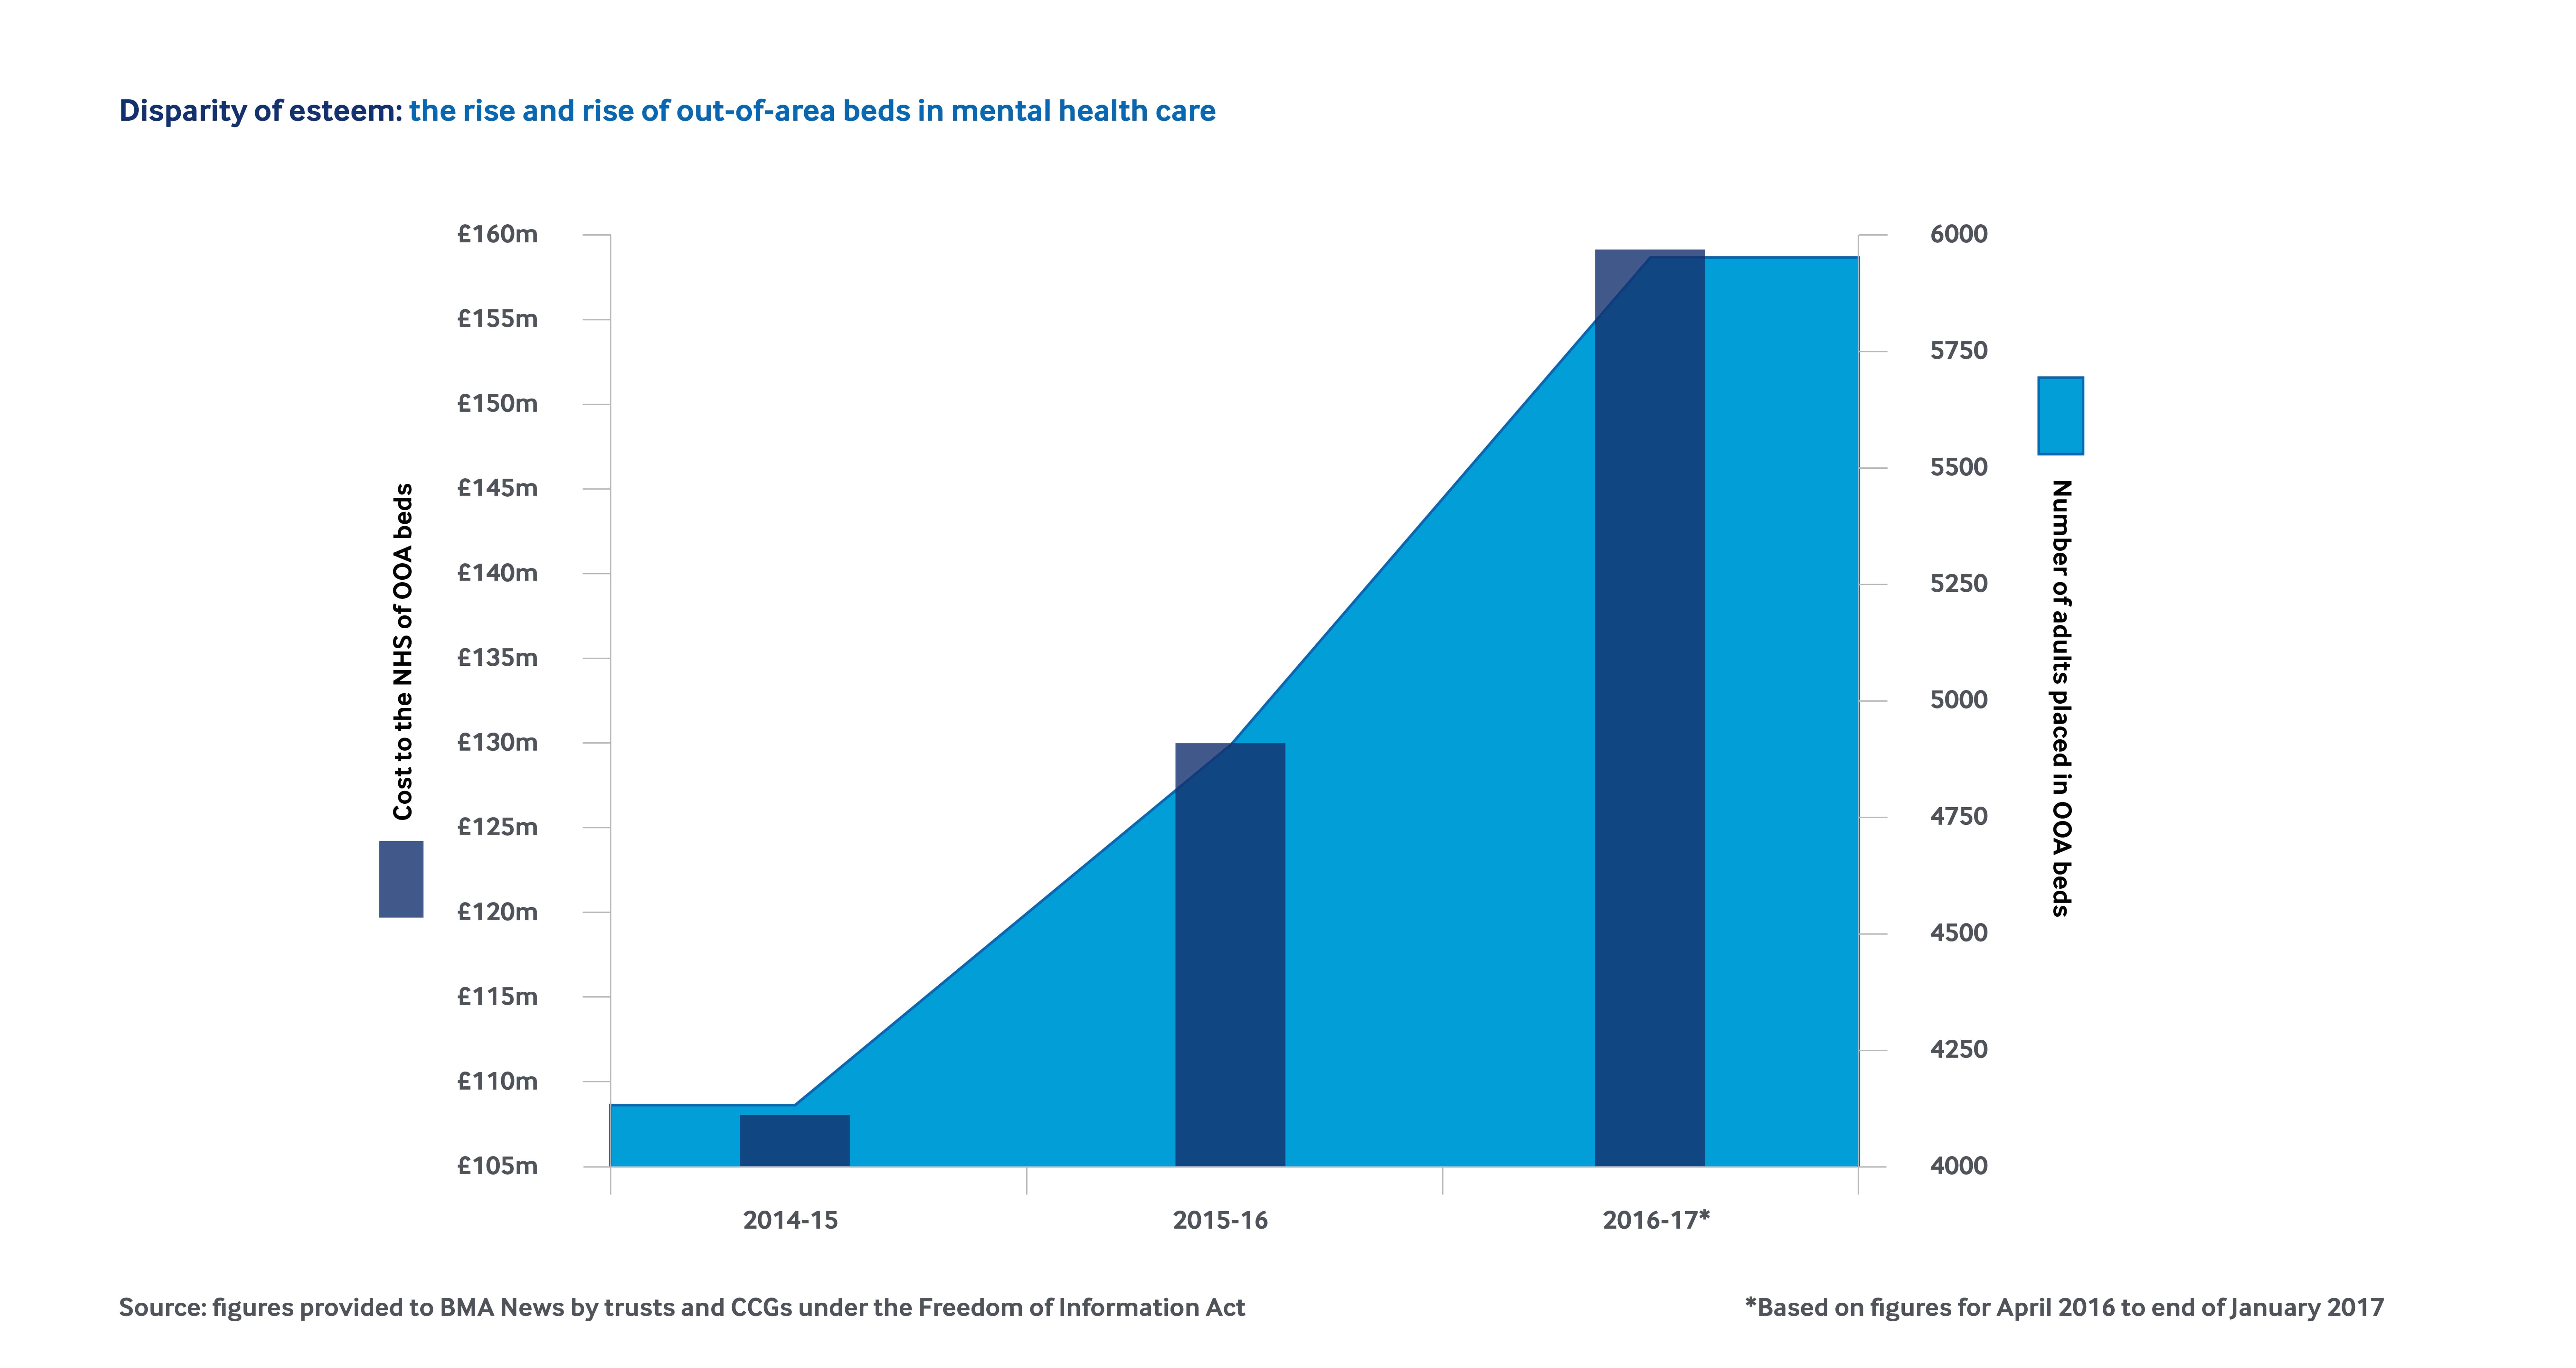 A graph showing the rise of out-of-area beds in mental health care based on figures for April 2016 to end of January 2017